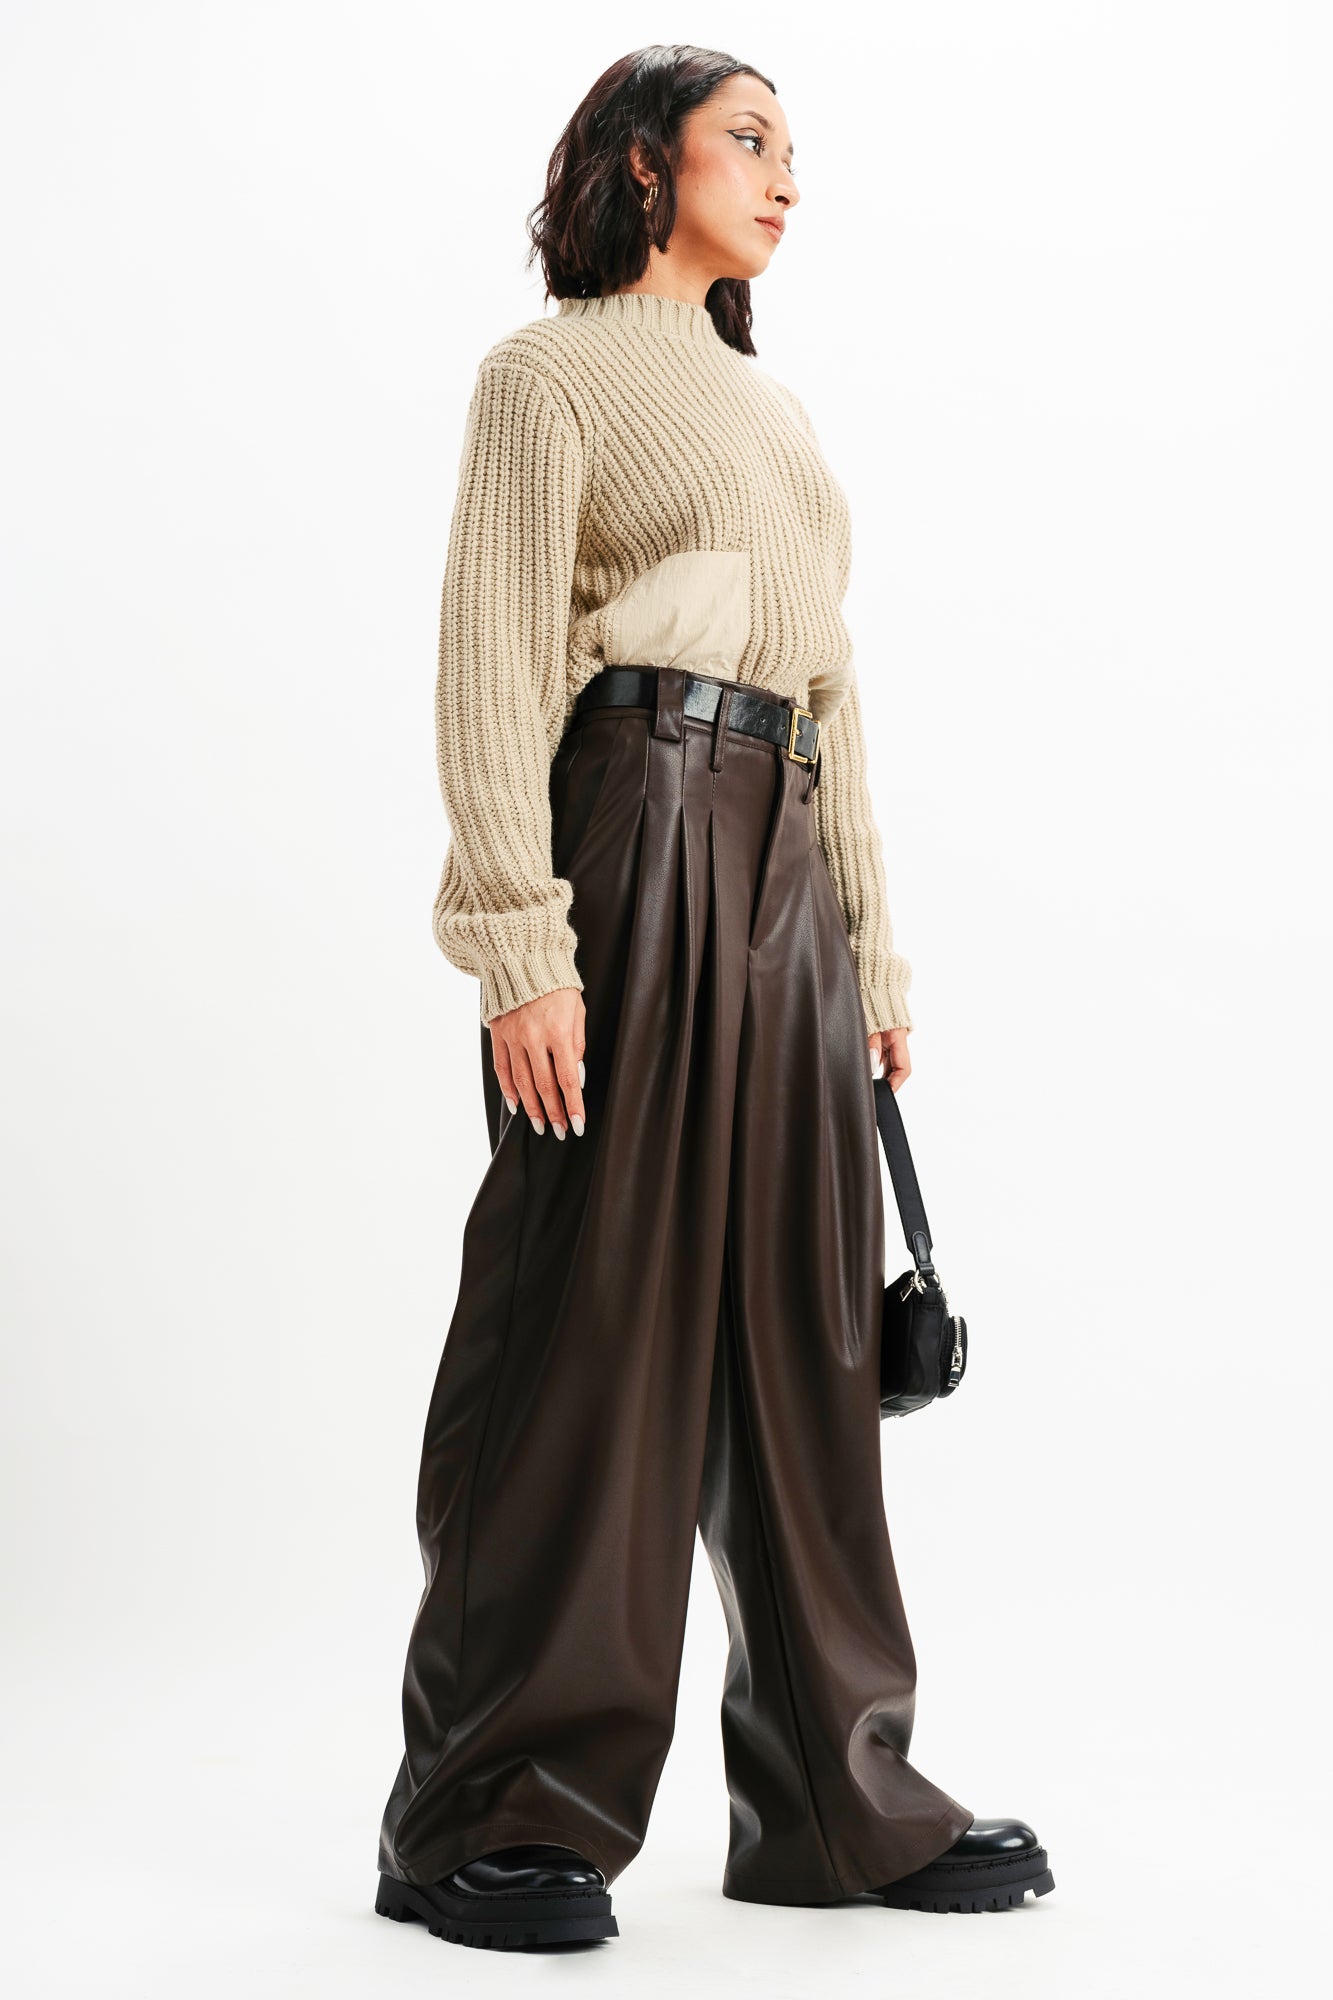 BROWN LEATHER TROUSERS